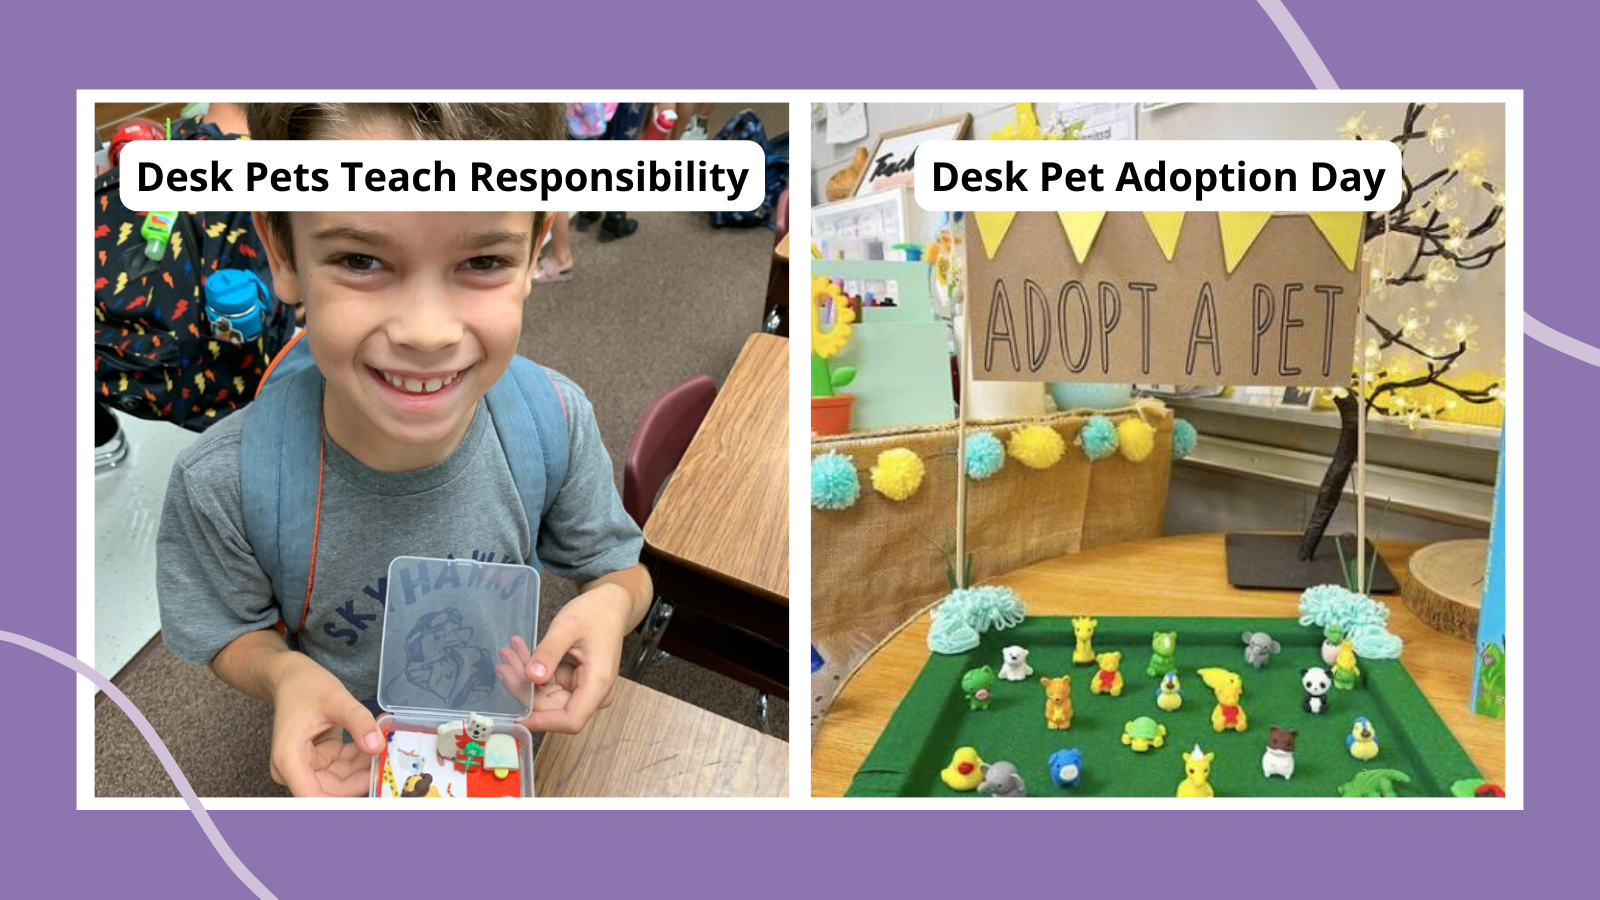 Desk Pet Ideas For Classroom Management: Pros And Cons